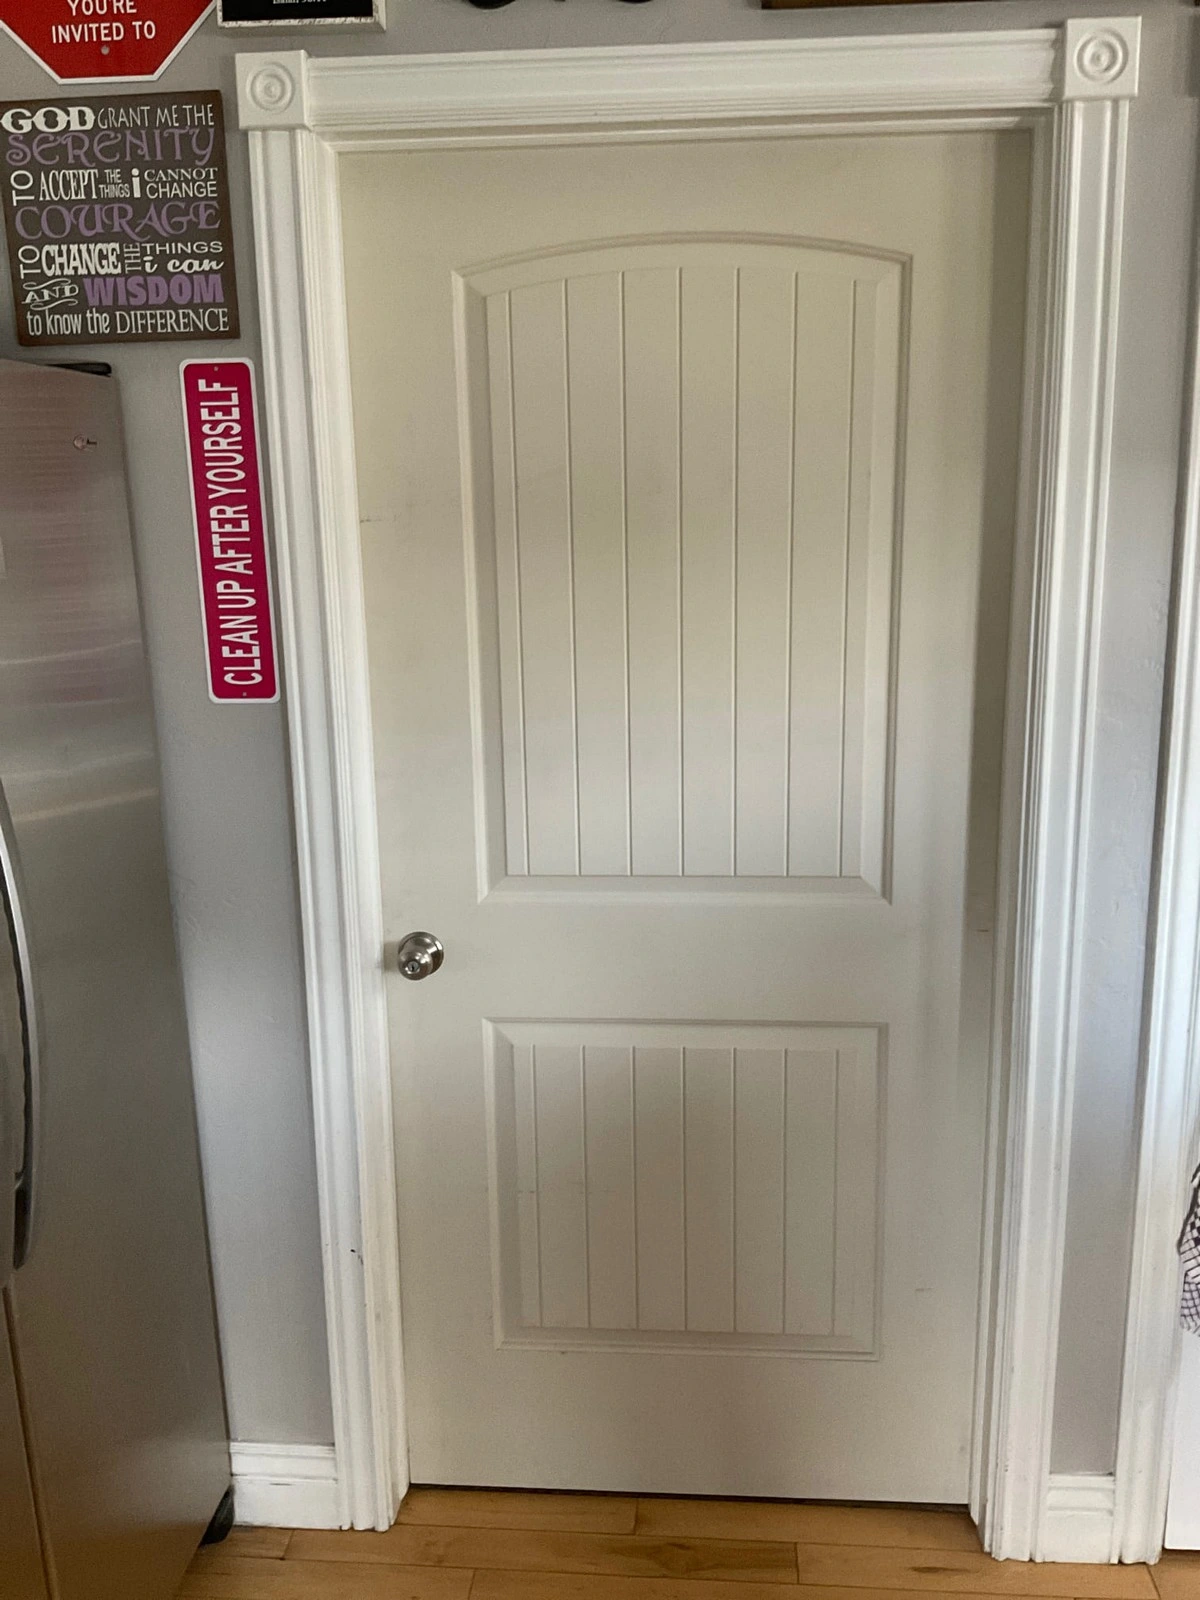 Lehi home’s door that was repaired to brand new by Mr. Handyman